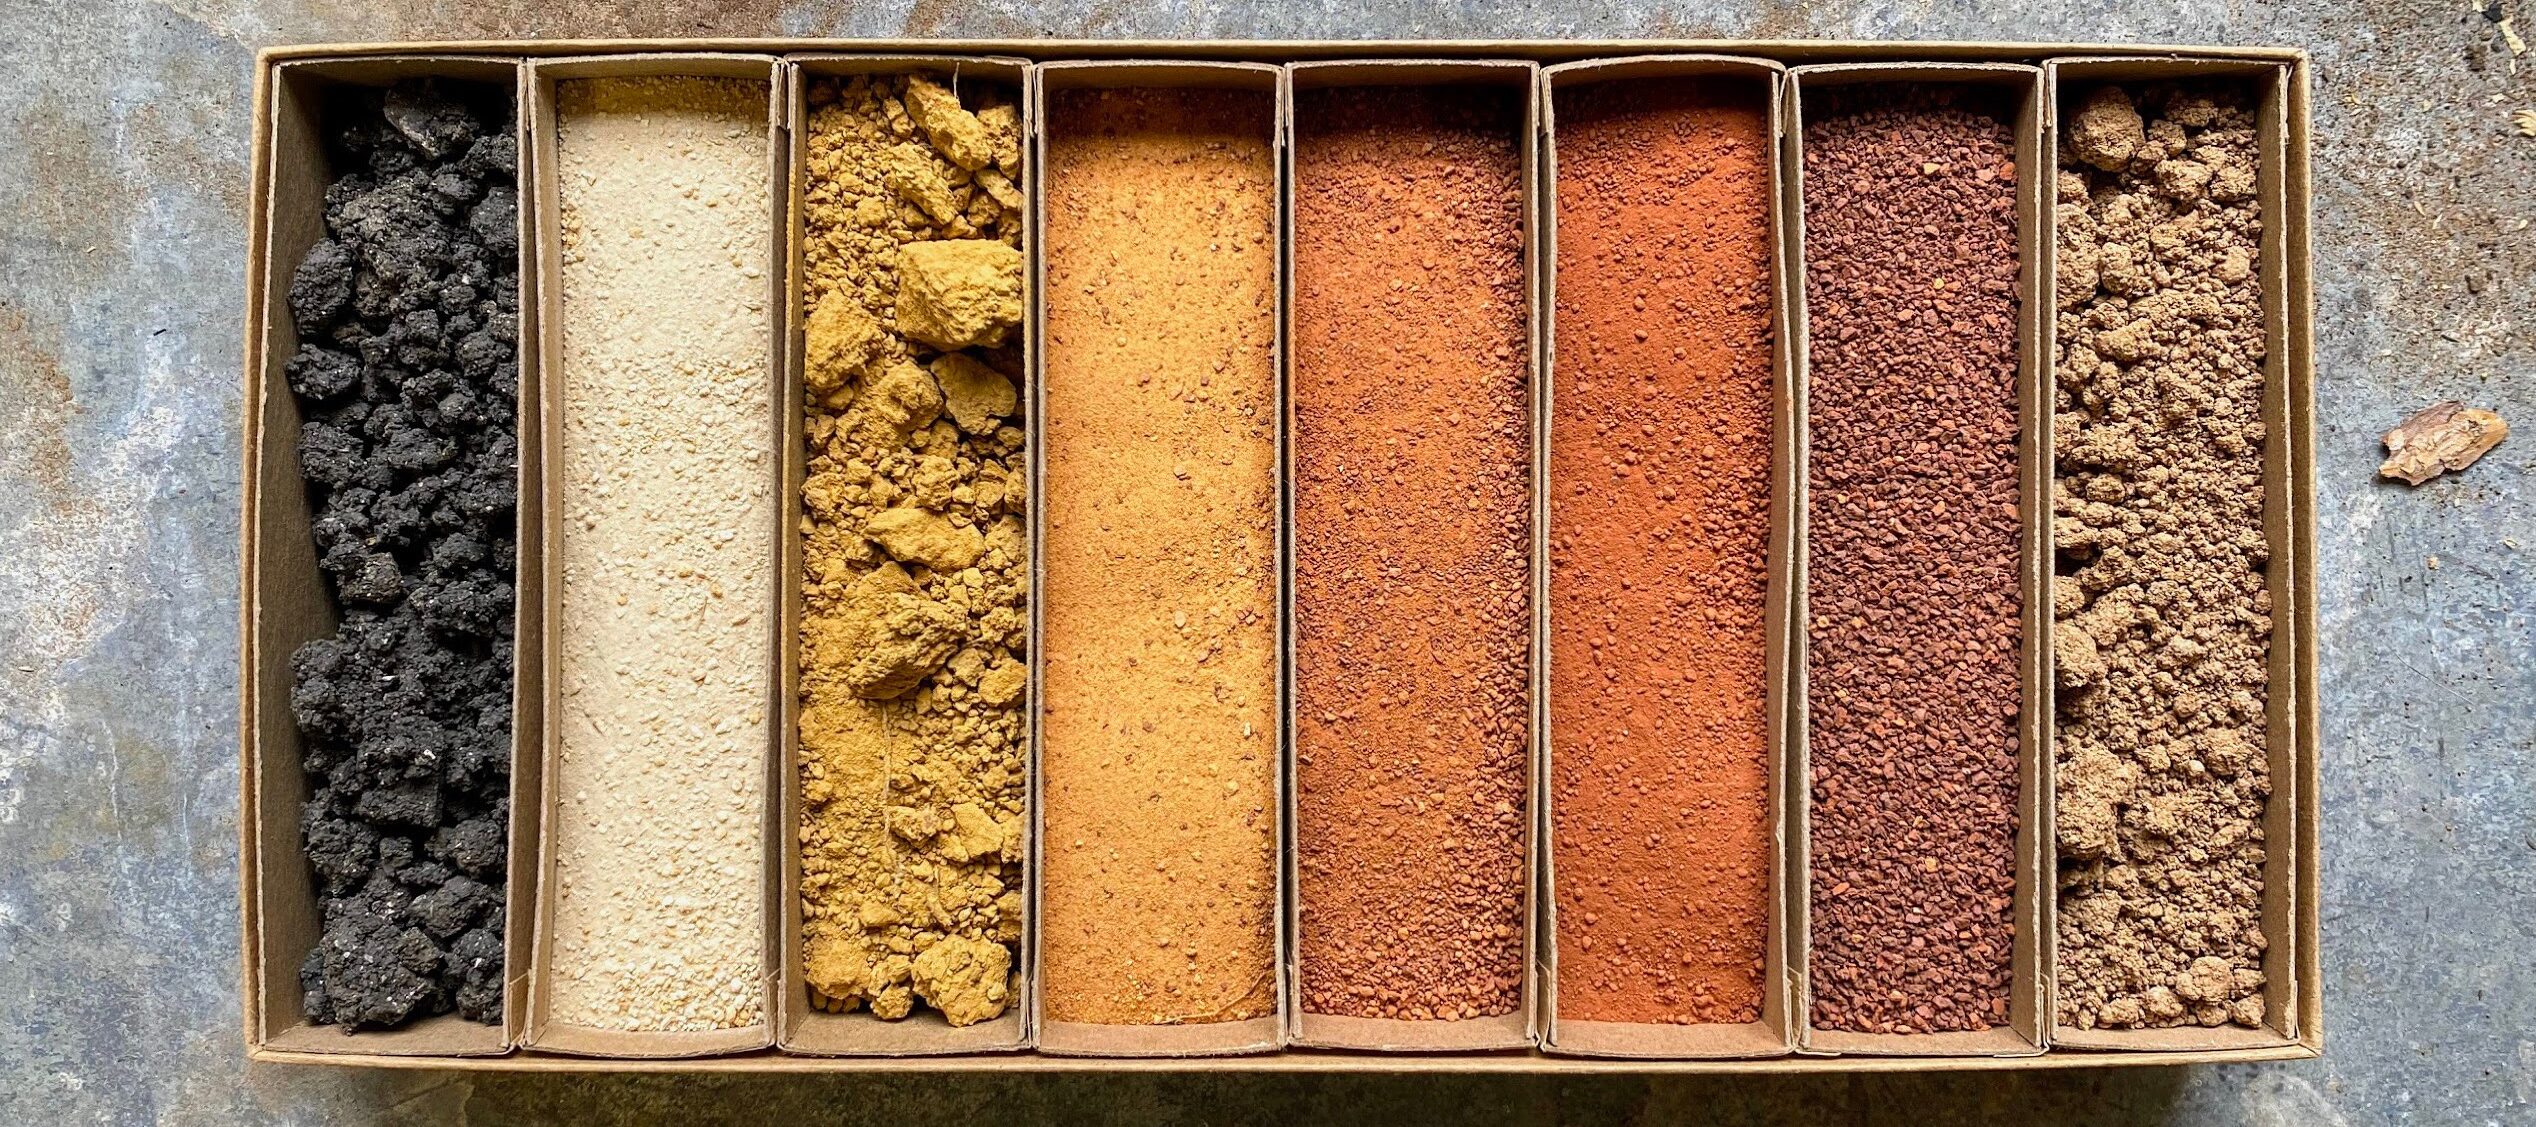 Close-up color photograph of a divided box with eight sections. Each section holds a different earth tone and granularity of soil.